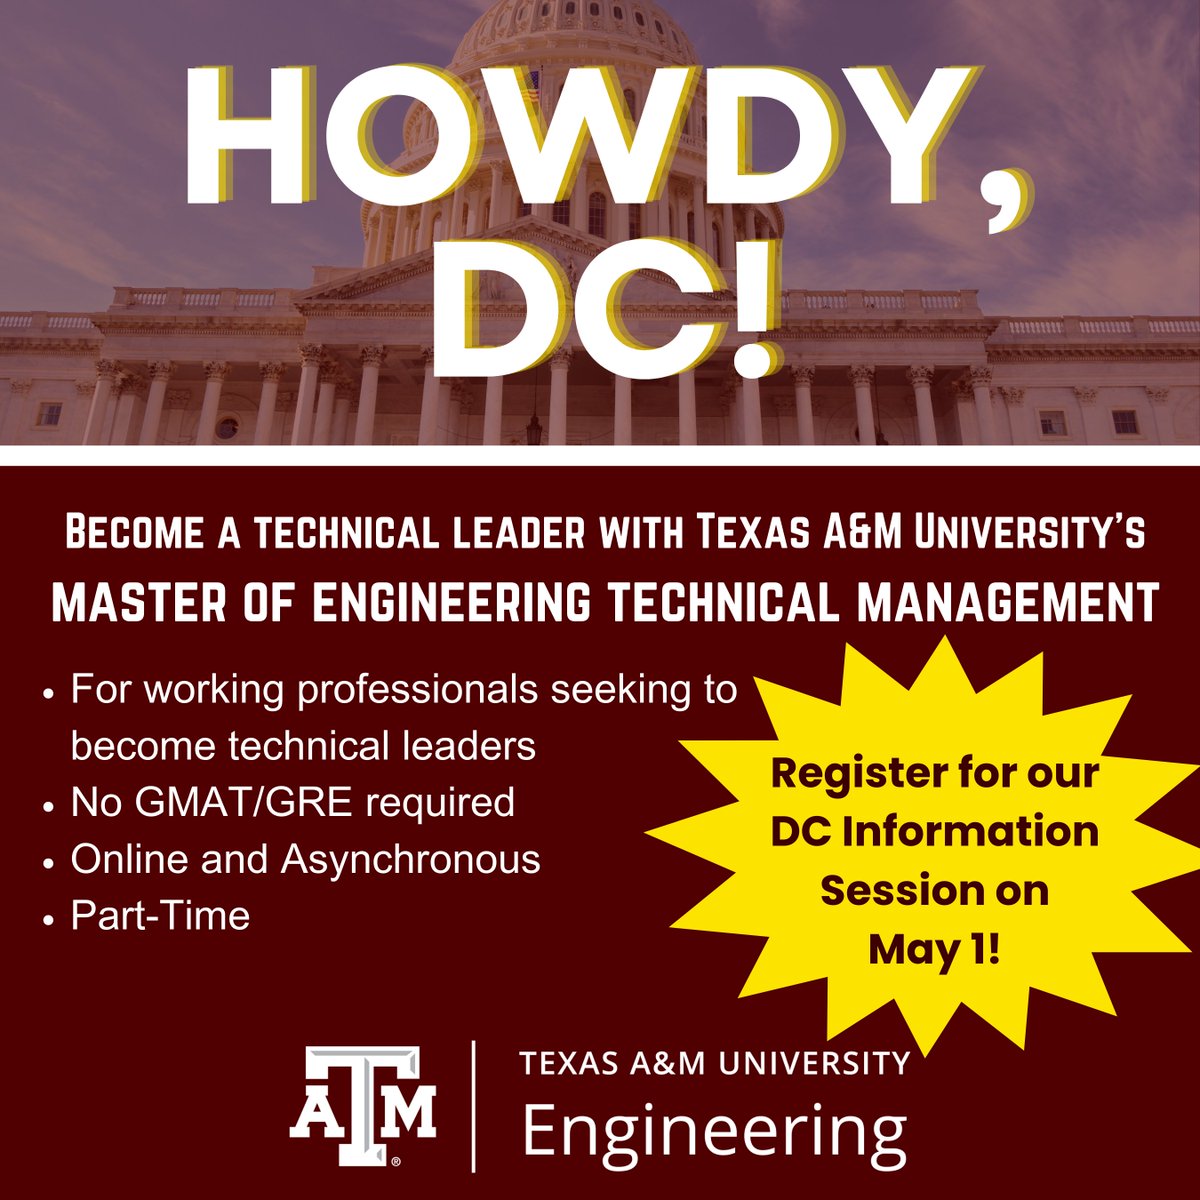 👋 Howdy, DC! Join us for our dinner info session on May 1 to learn how our online Master of Engineering Technical Management (#METM) graduate degree bridges tech and business. 

Register here: bit.ly/3DcxQvS.

#engineeringmanagement #engineeringleadership #tamu #metm